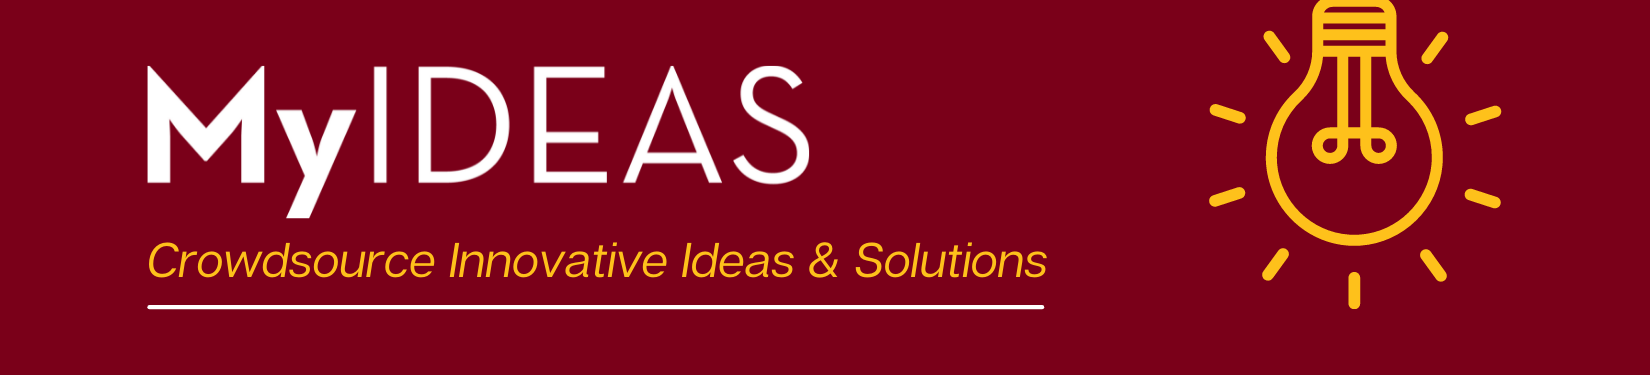 MyIDEAS, Crowdsource innovative ideas & solutions. Picture with text and lightbulb icon